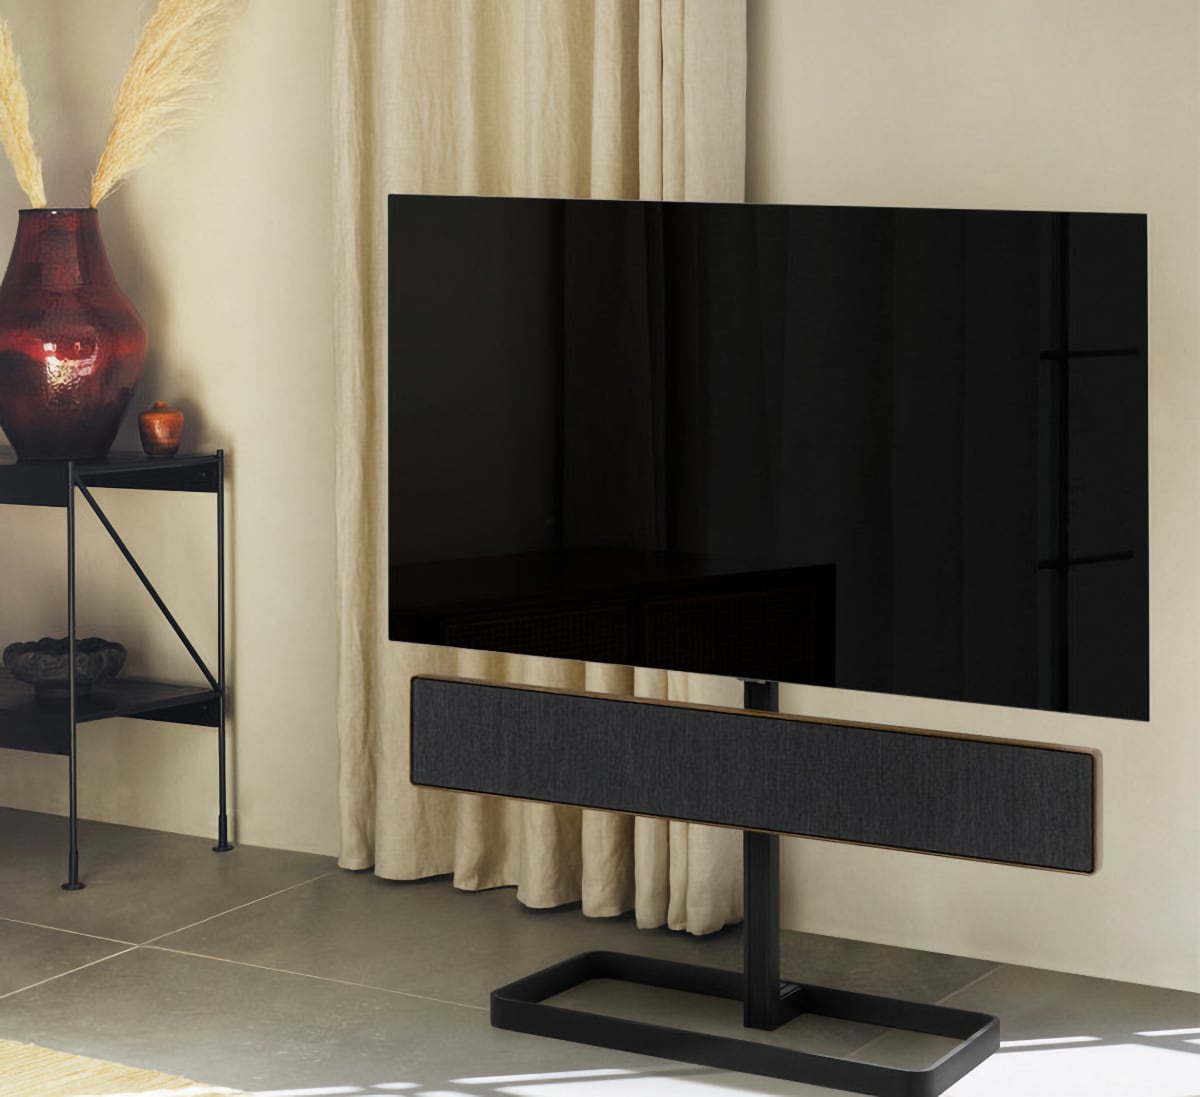 Bang & Olufsen launches a soundbar designed to be updated, not